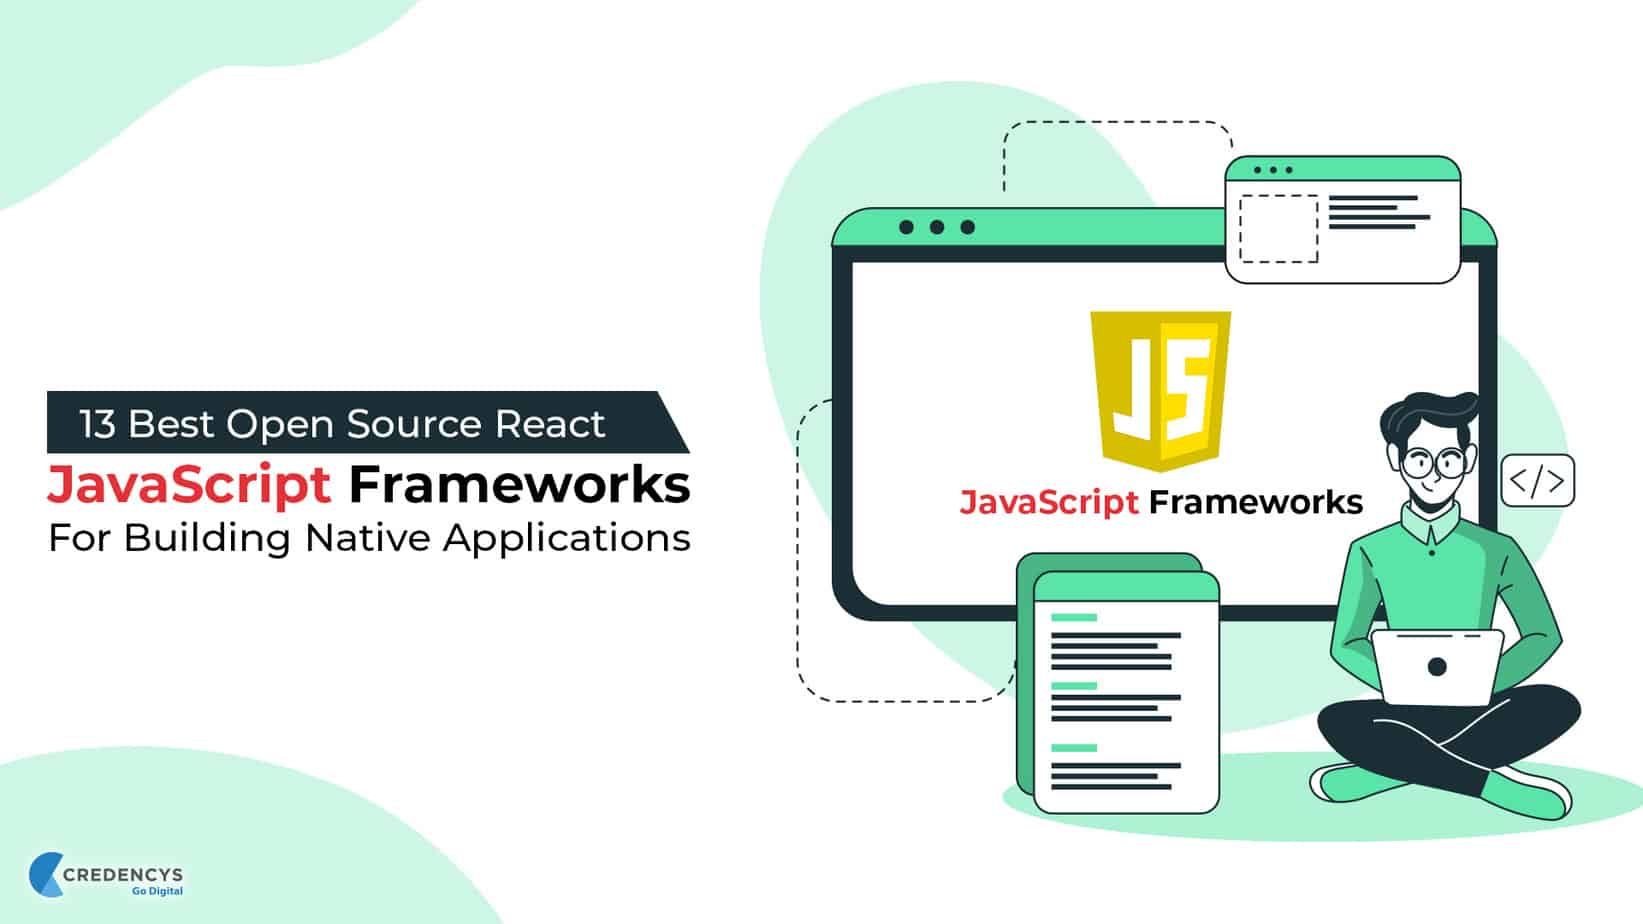 13 Best Open Source React JavaScript Frameworks For Building Native Applications